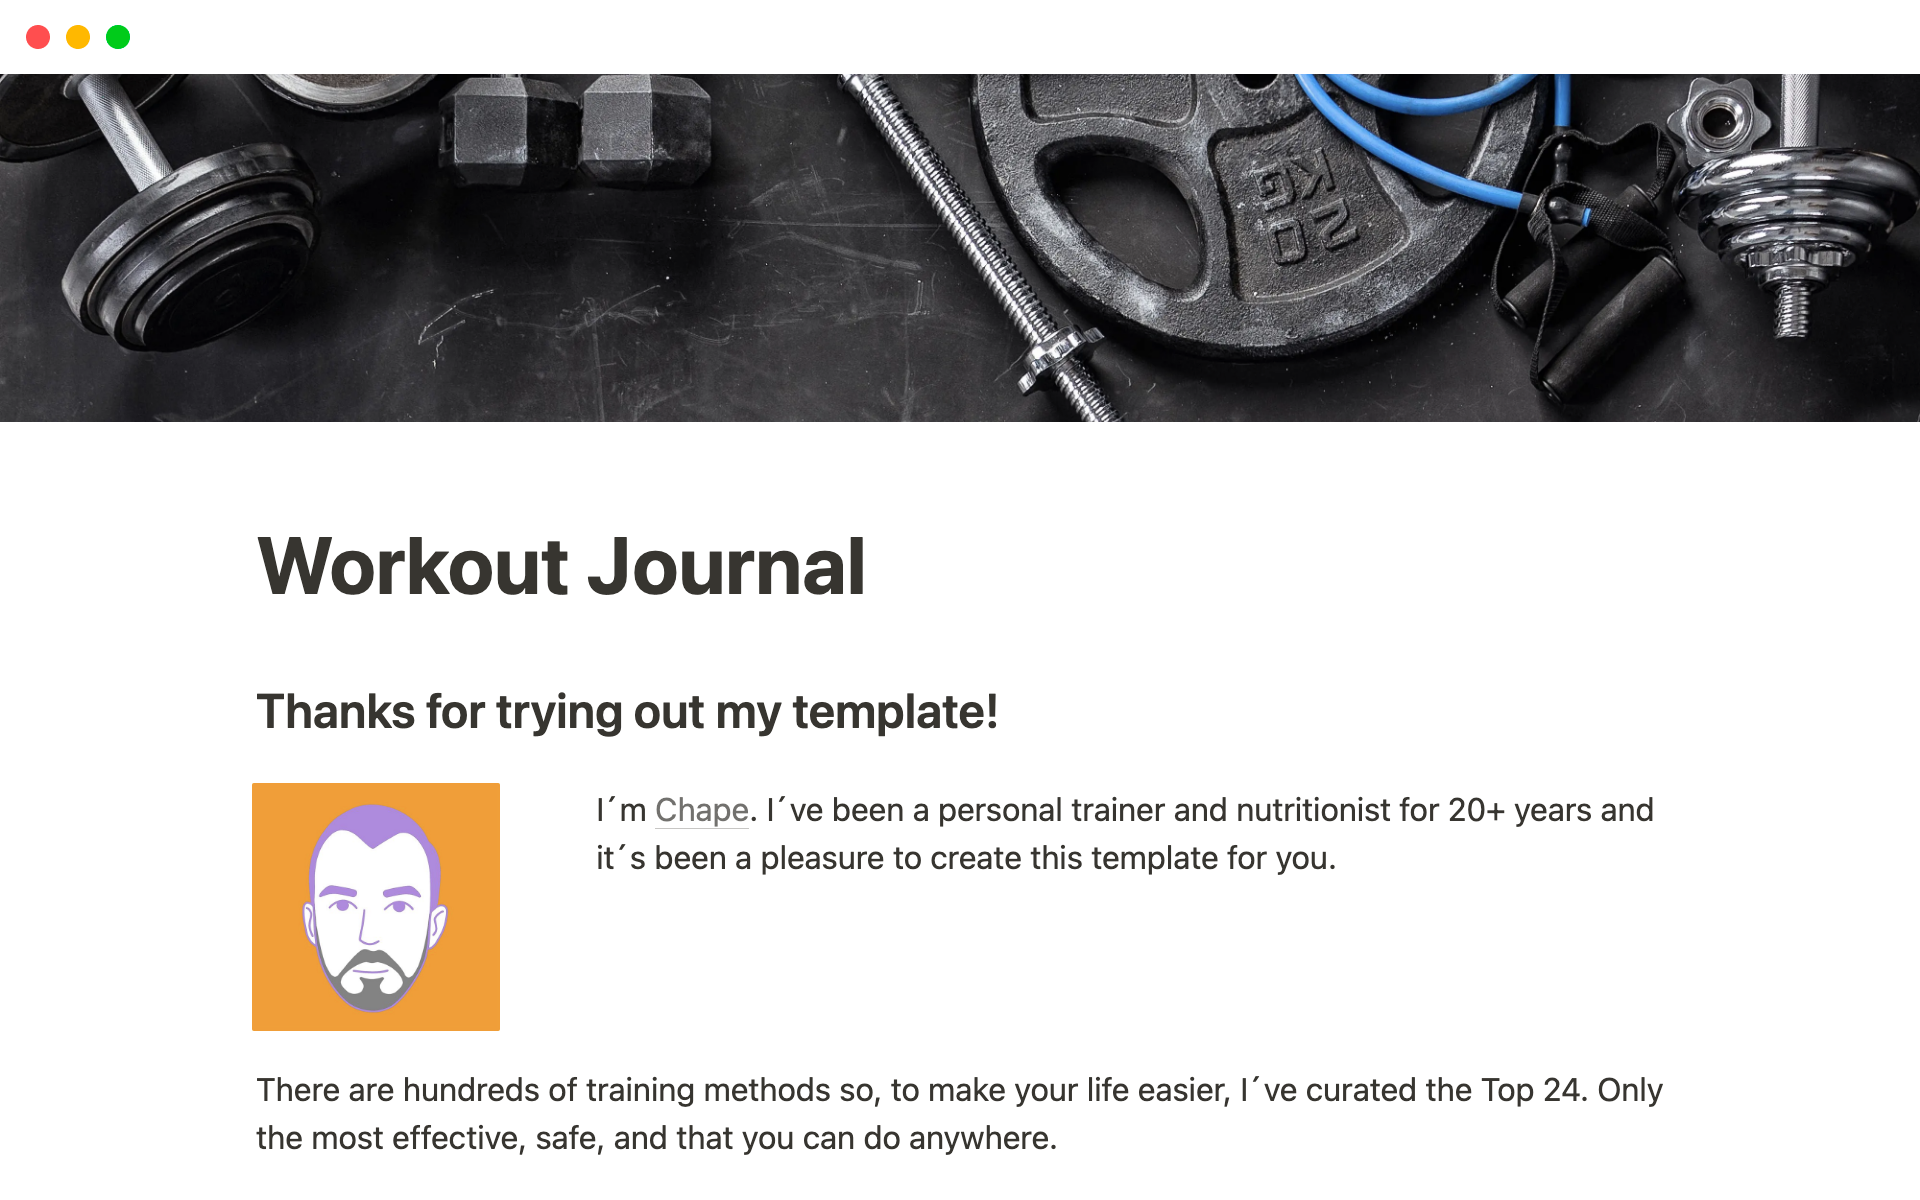 Plan and track your fitness journey